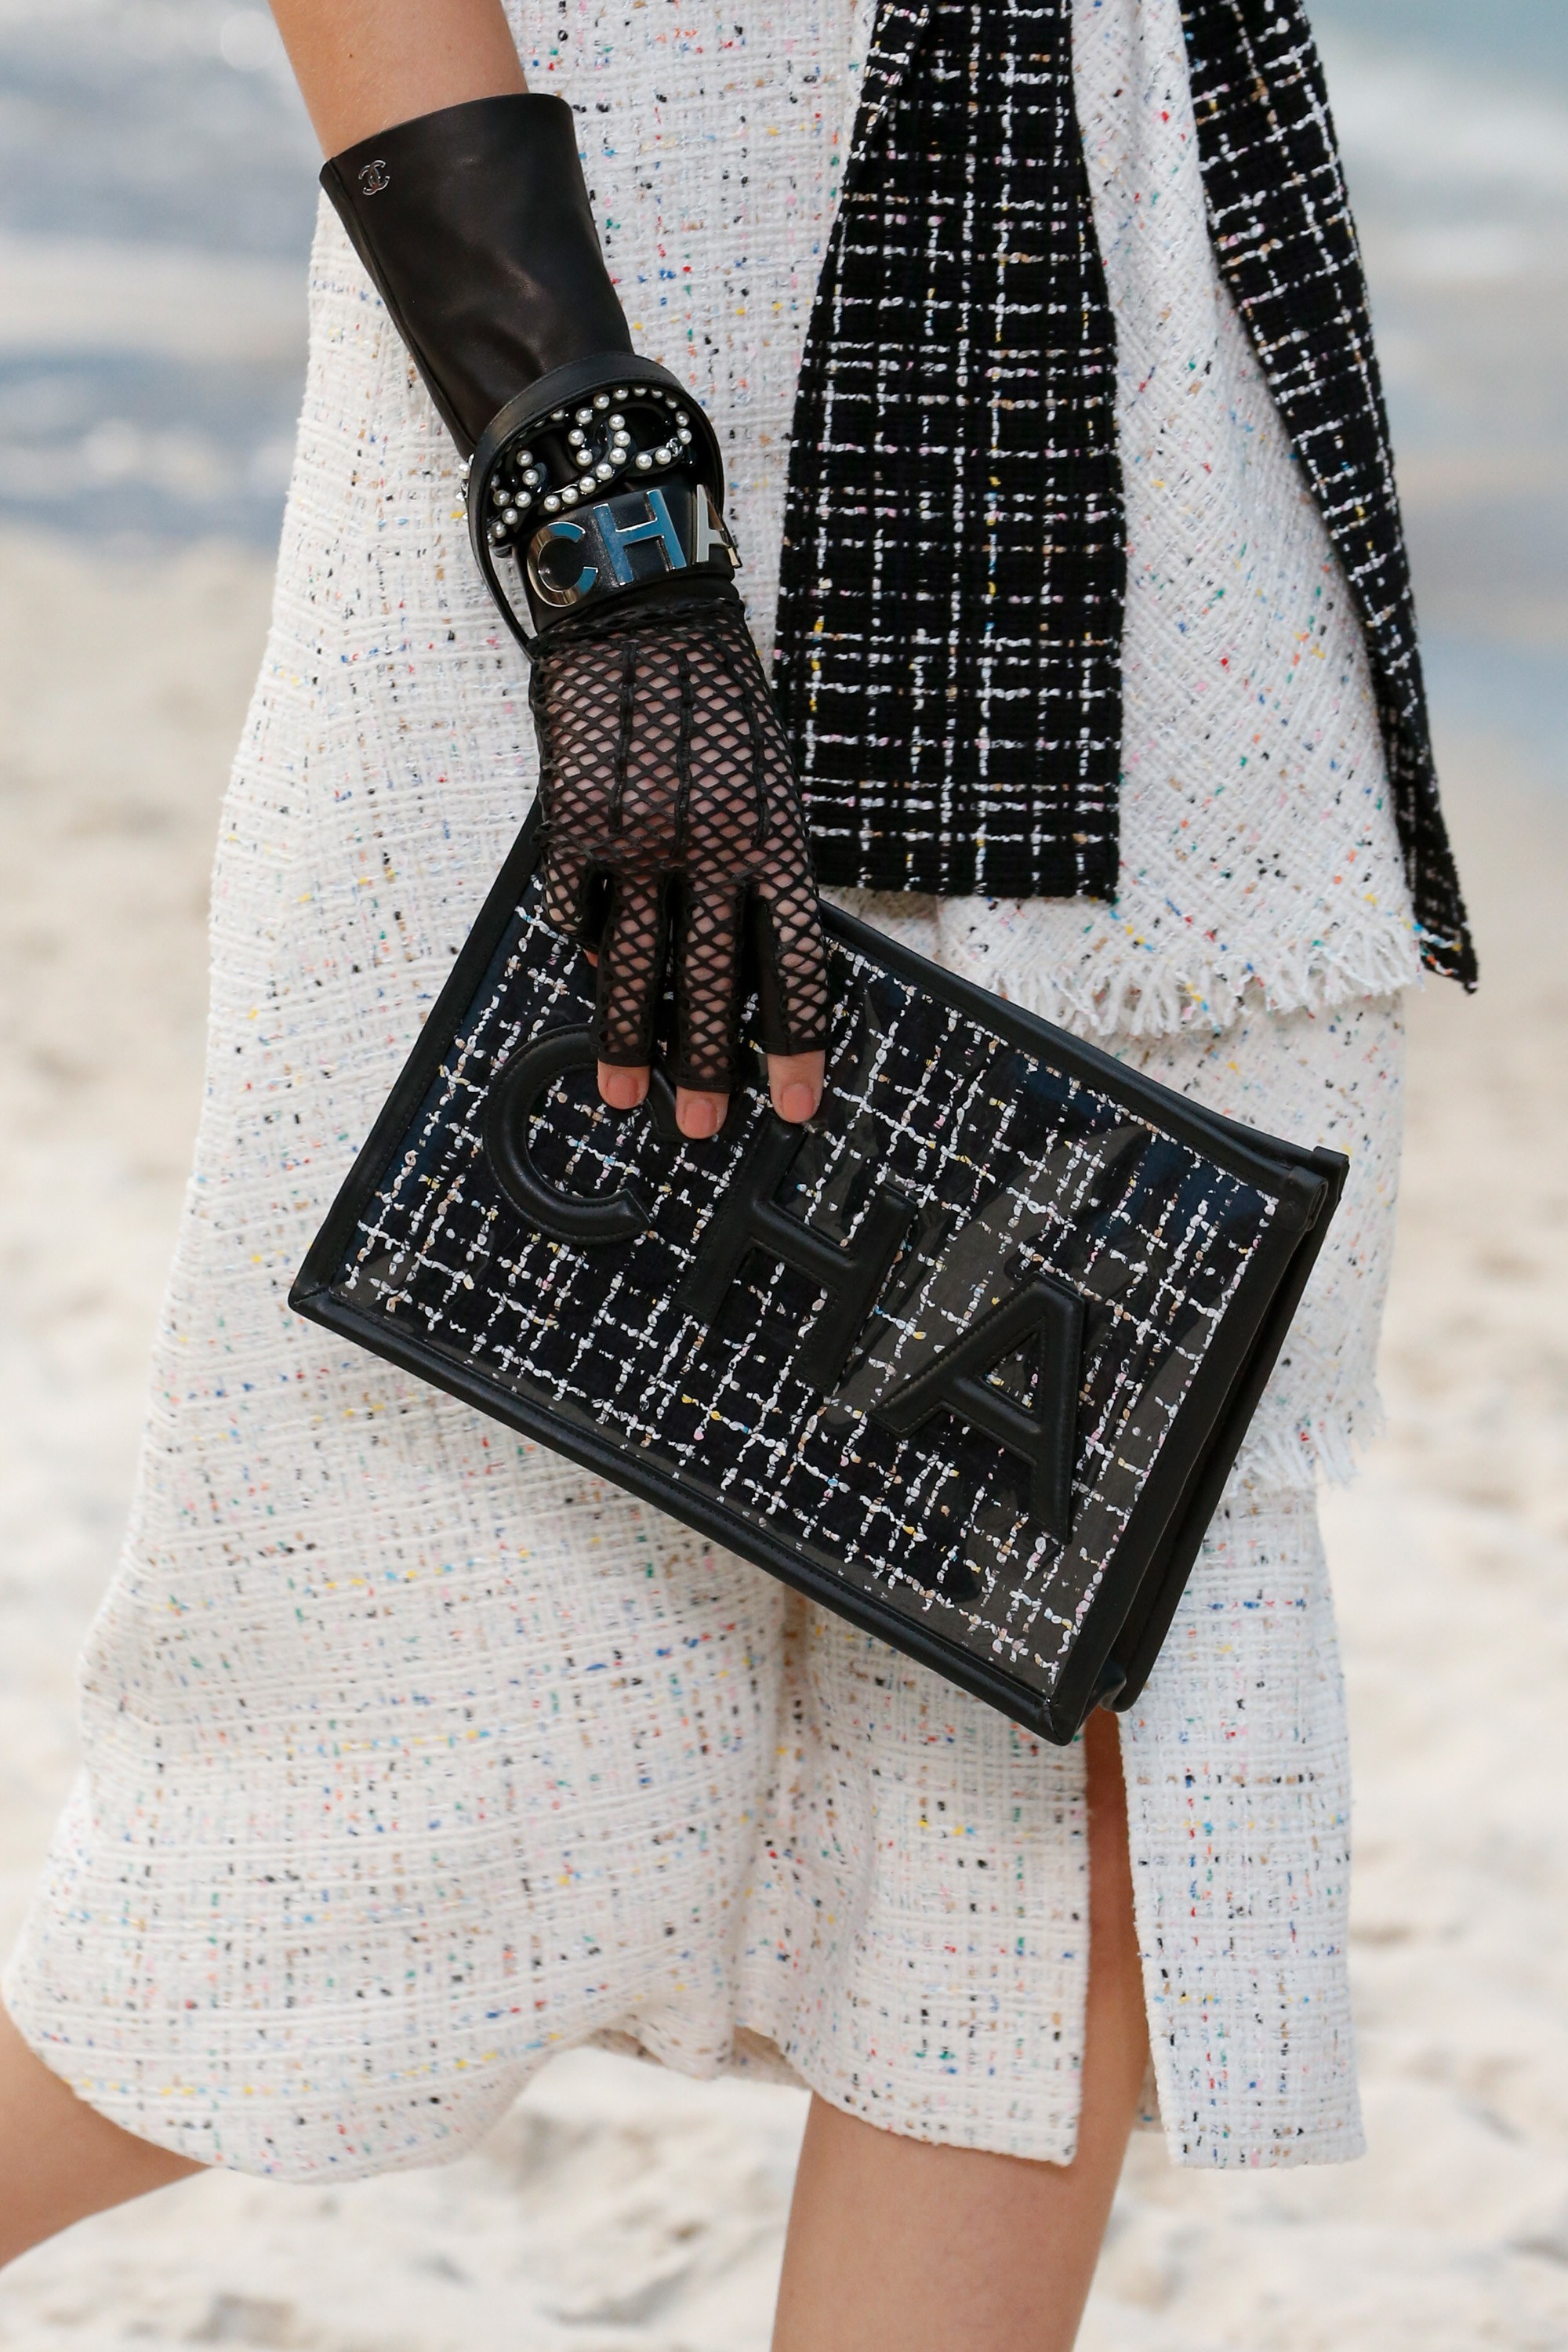 Chanel Spring 2019 By the Sea Terrycloth Flap Bag · INTO